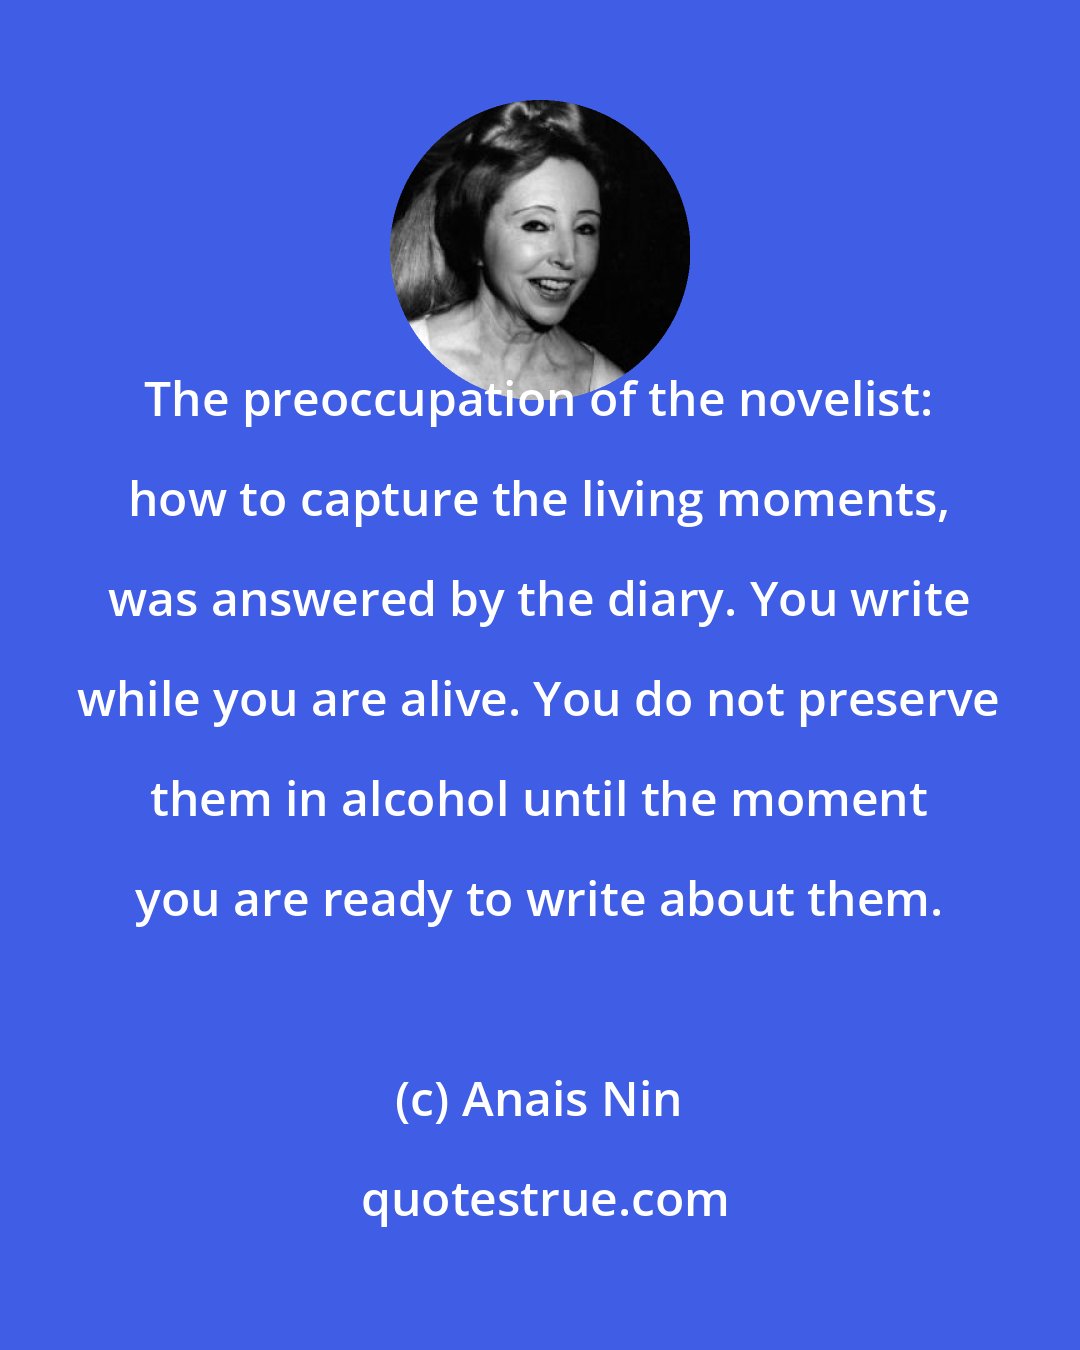 Anais Nin: The preoccupation of the novelist: how to capture the living moments, was answered by the diary. You write while you are alive. You do not preserve them in alcohol until the moment you are ready to write about them.